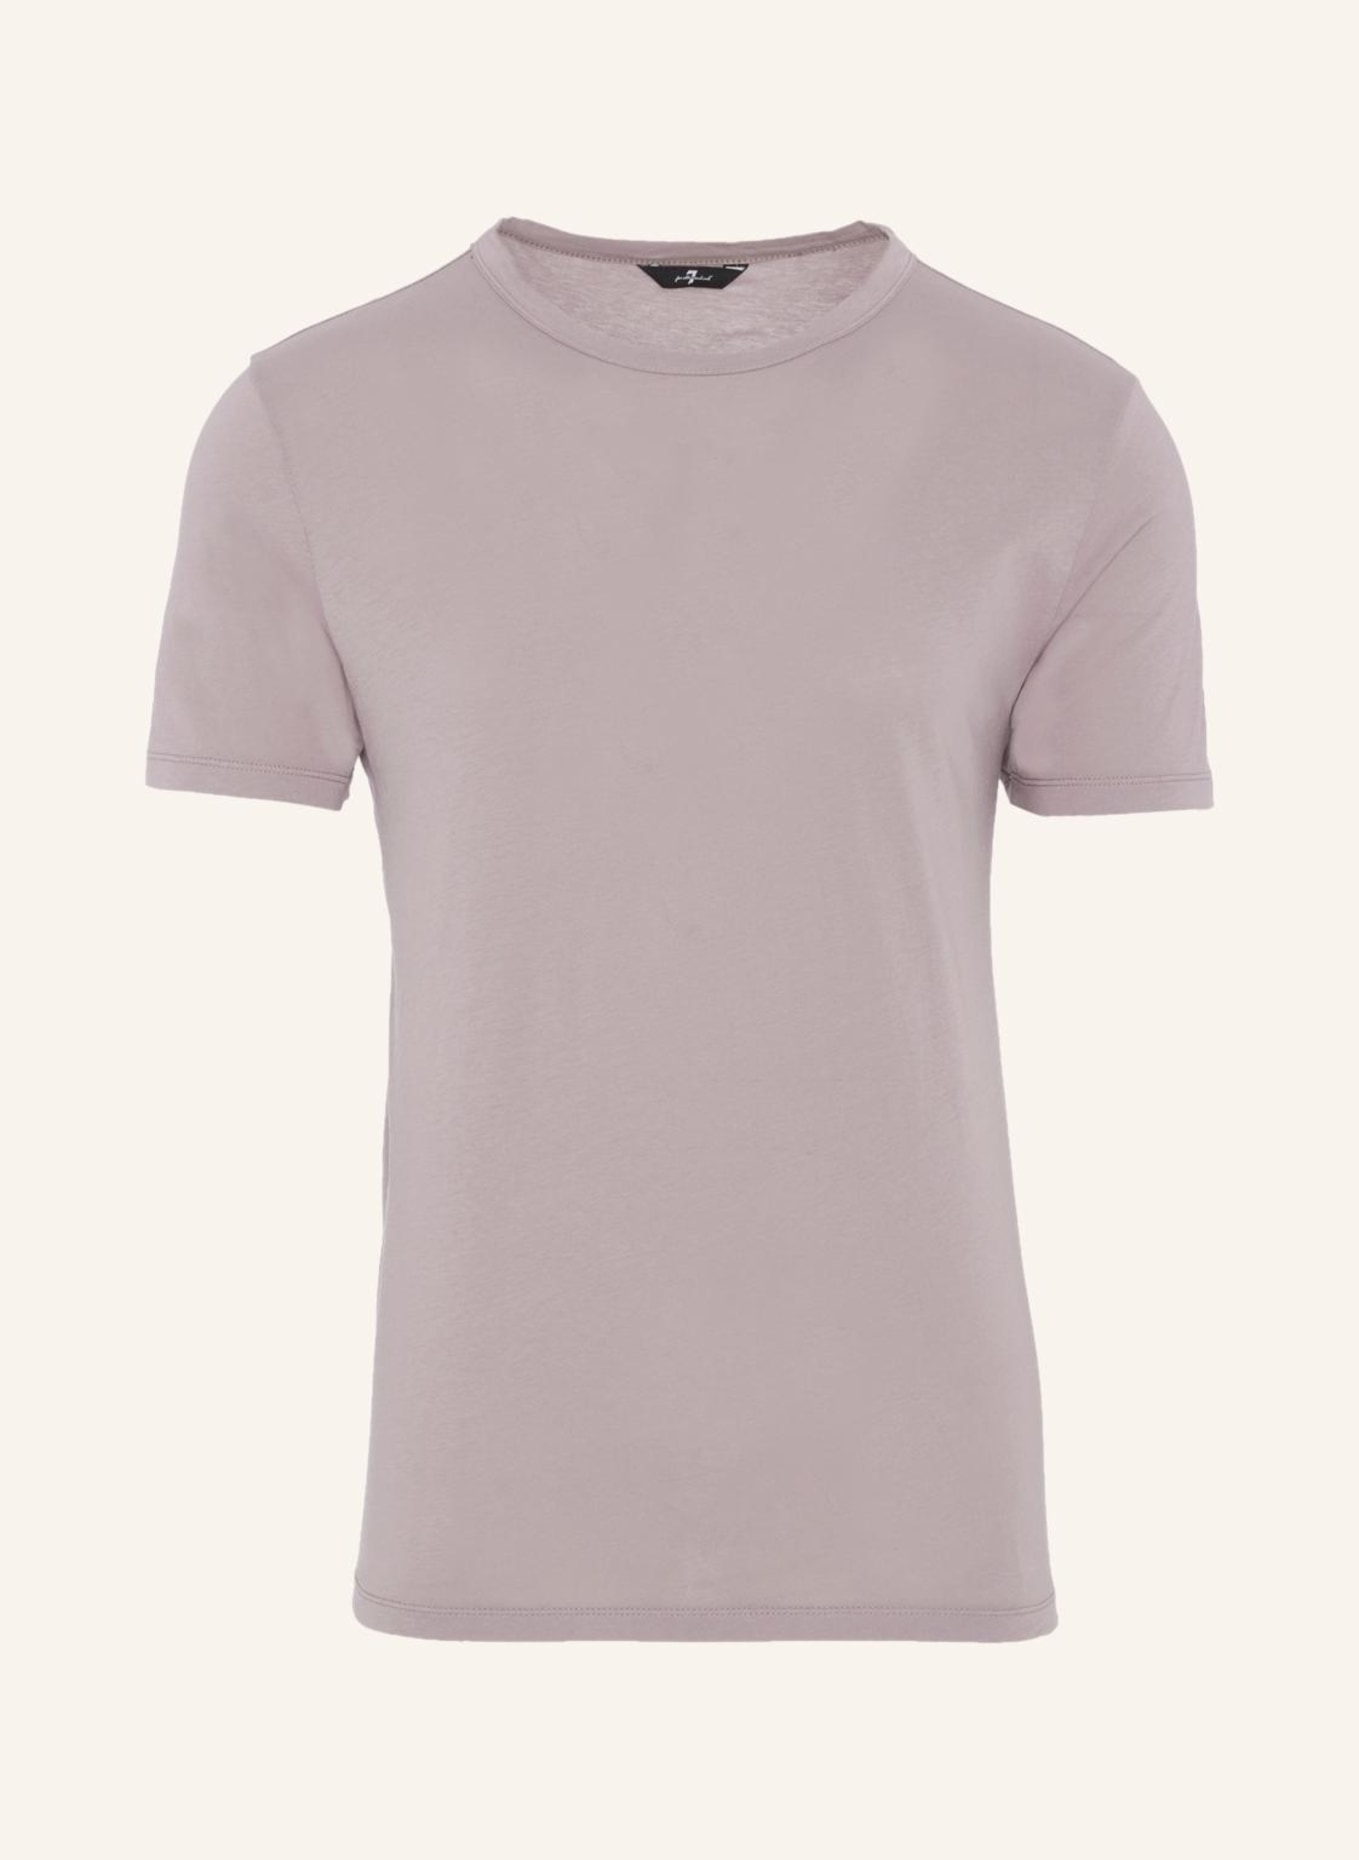 7 for all mankind FEATHERWEIGHT T-shirt, Farbe: LILA (Bild 1)